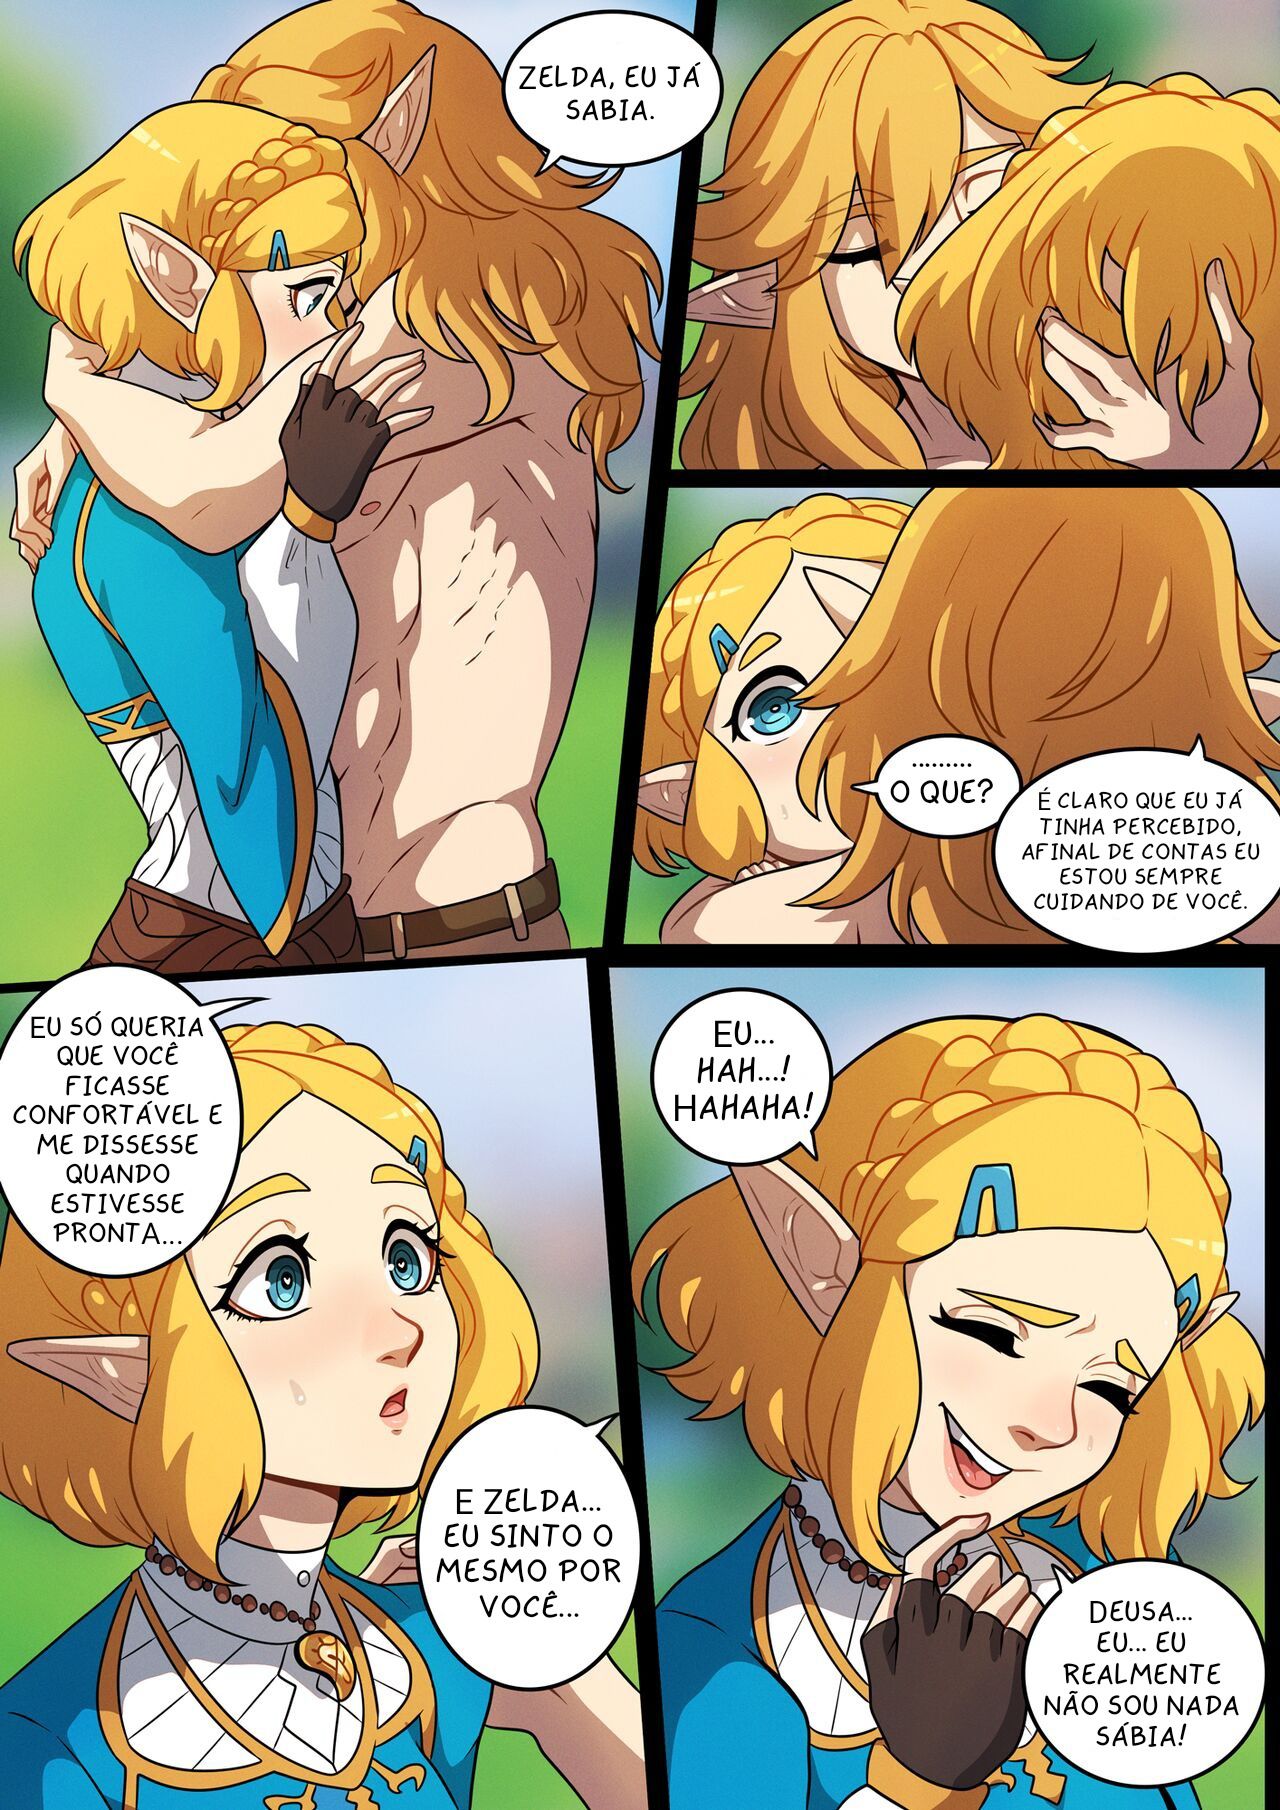 A Night with Zelda Hentai pt-br 08